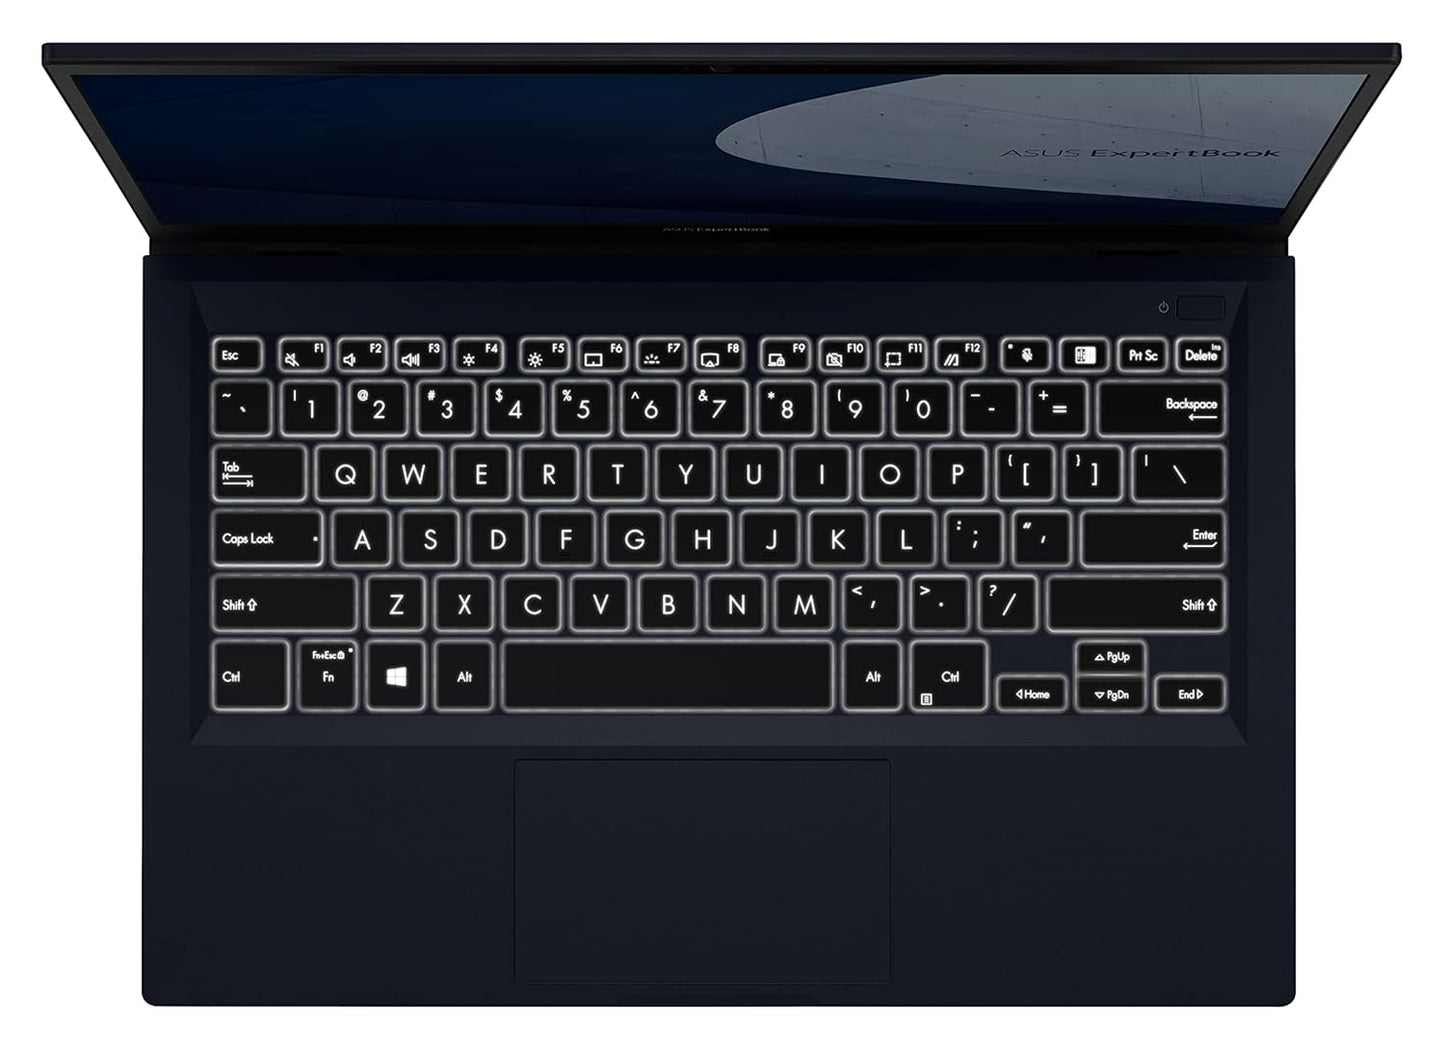 (Brand Refurbished) ASUS ExpertBook B1 Business Laptop, 14” FHD, Intel Core i5-1135G7, 512GB SSD, 8GB RAM, Military Grade Durable, AI Noise Cancelling, Webcam Privacy Shield, Win 10 Pro, Star Black, B1400CEAE-EK4627X